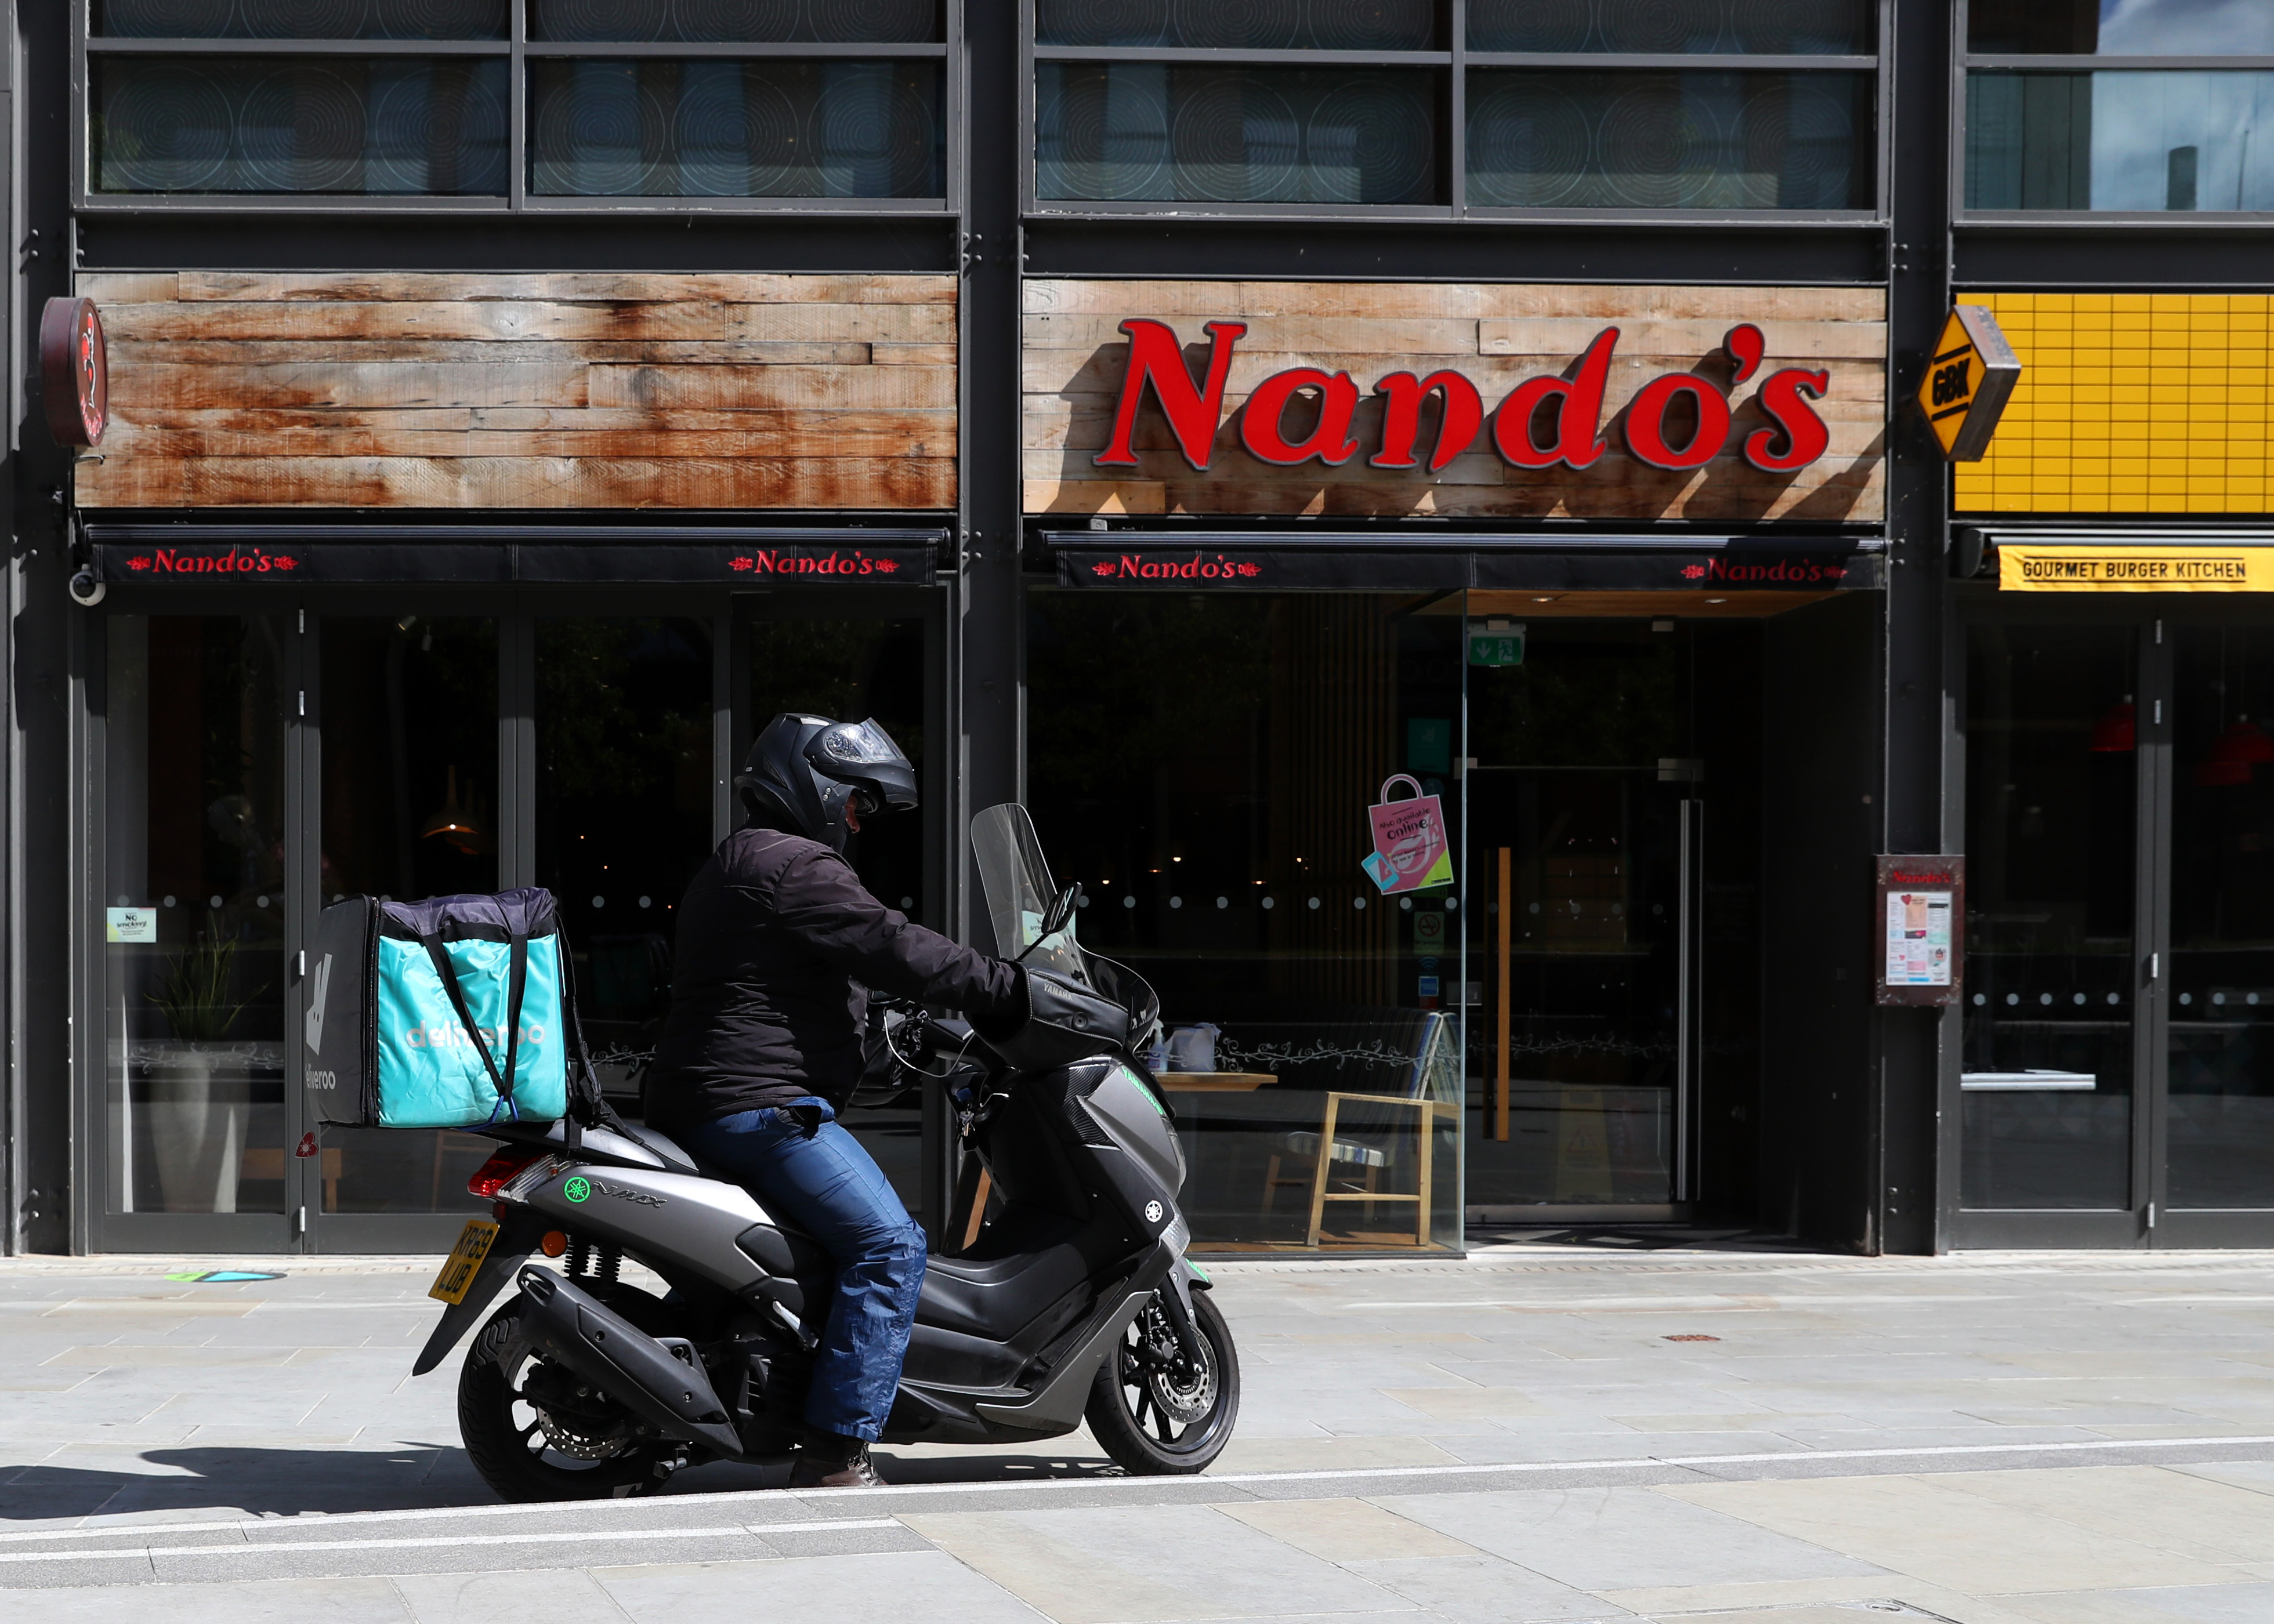 A Nandos restaurant in England with a delivery rider outside